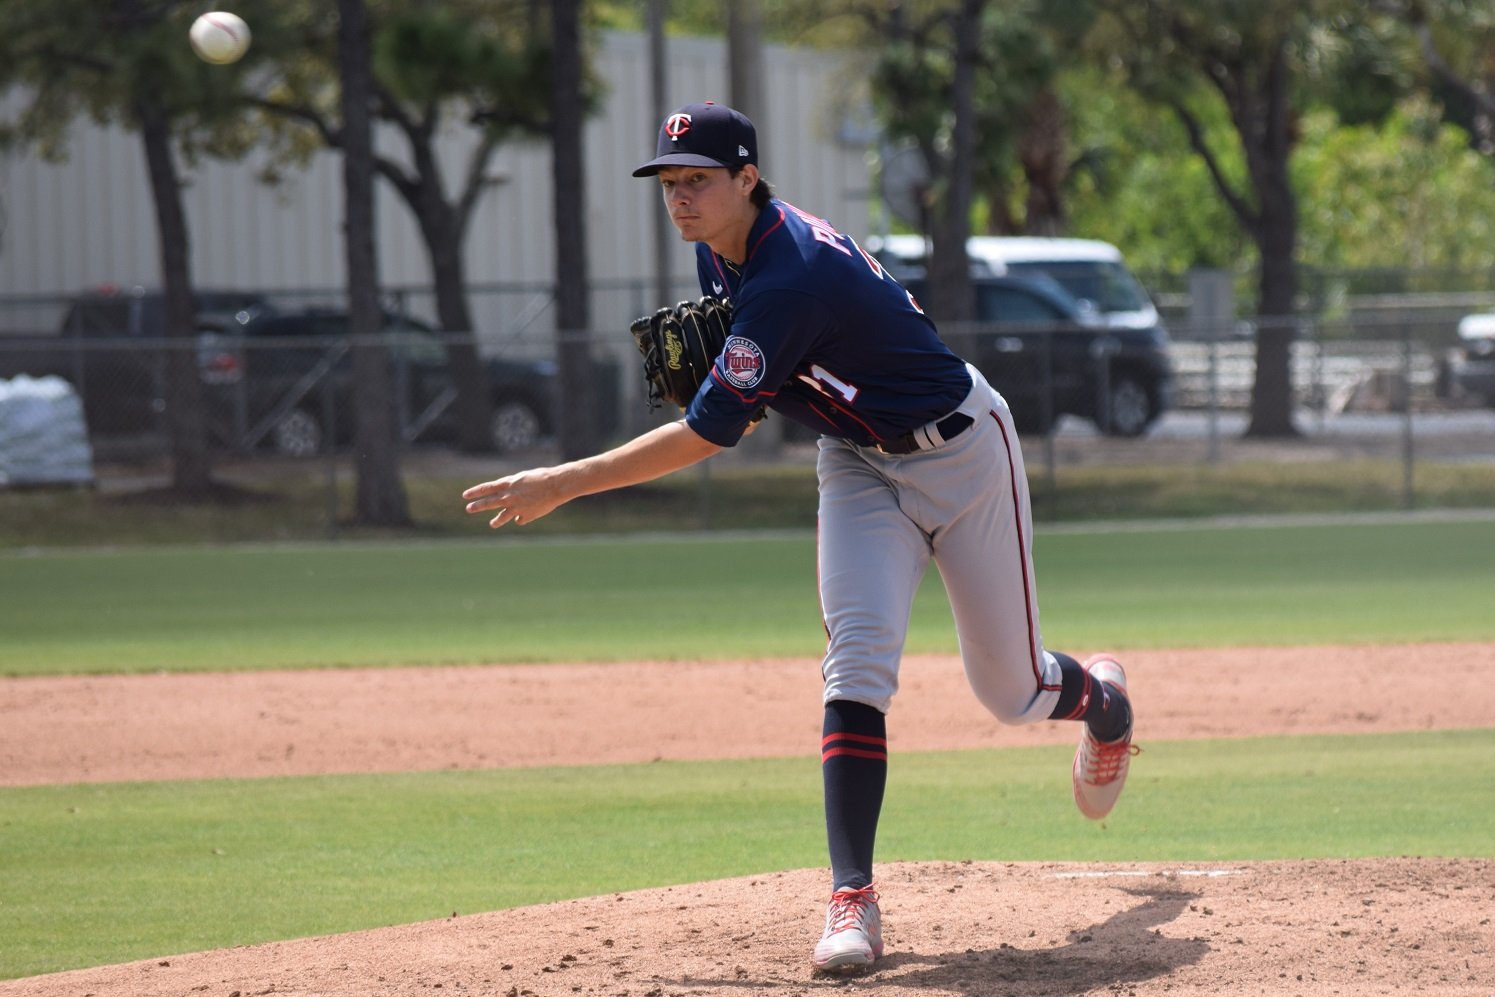 Twins rookie pitcher Louie Varland confident, throwing heat from